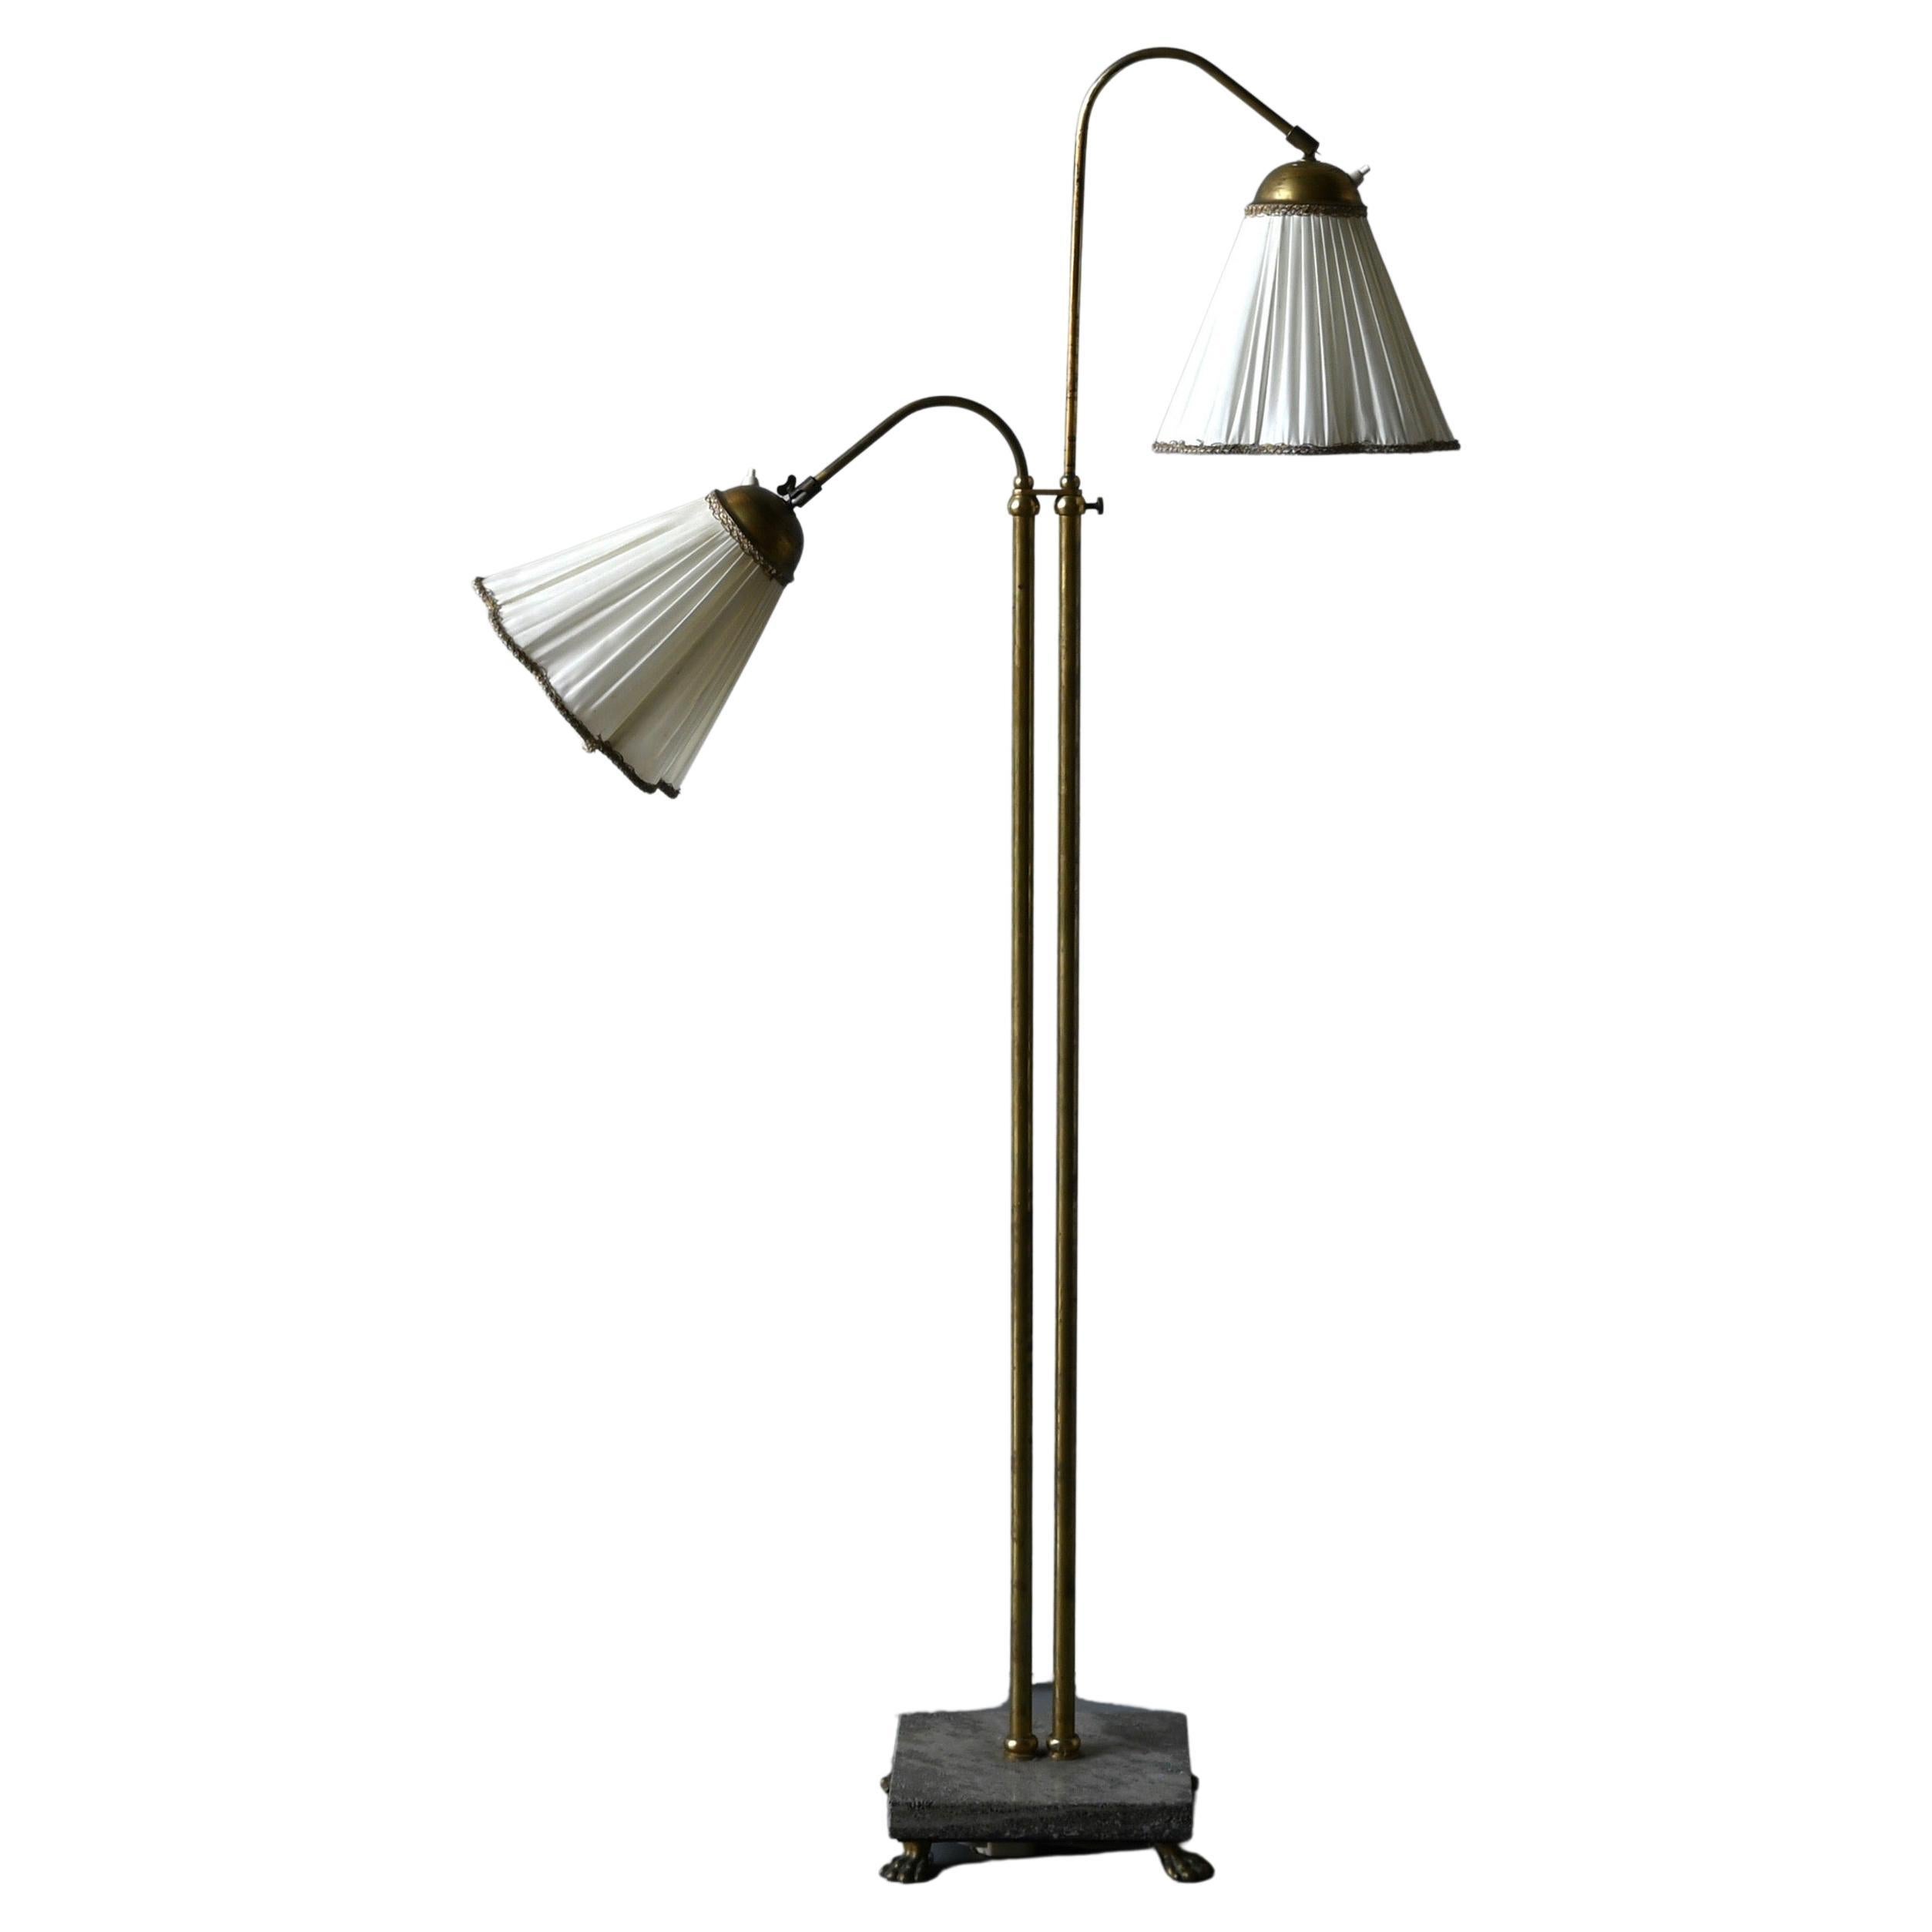 Swedish, Adjustable Two-Armed Floor Lamp, Brass, Marble, Fabric, Sweden, 1940s